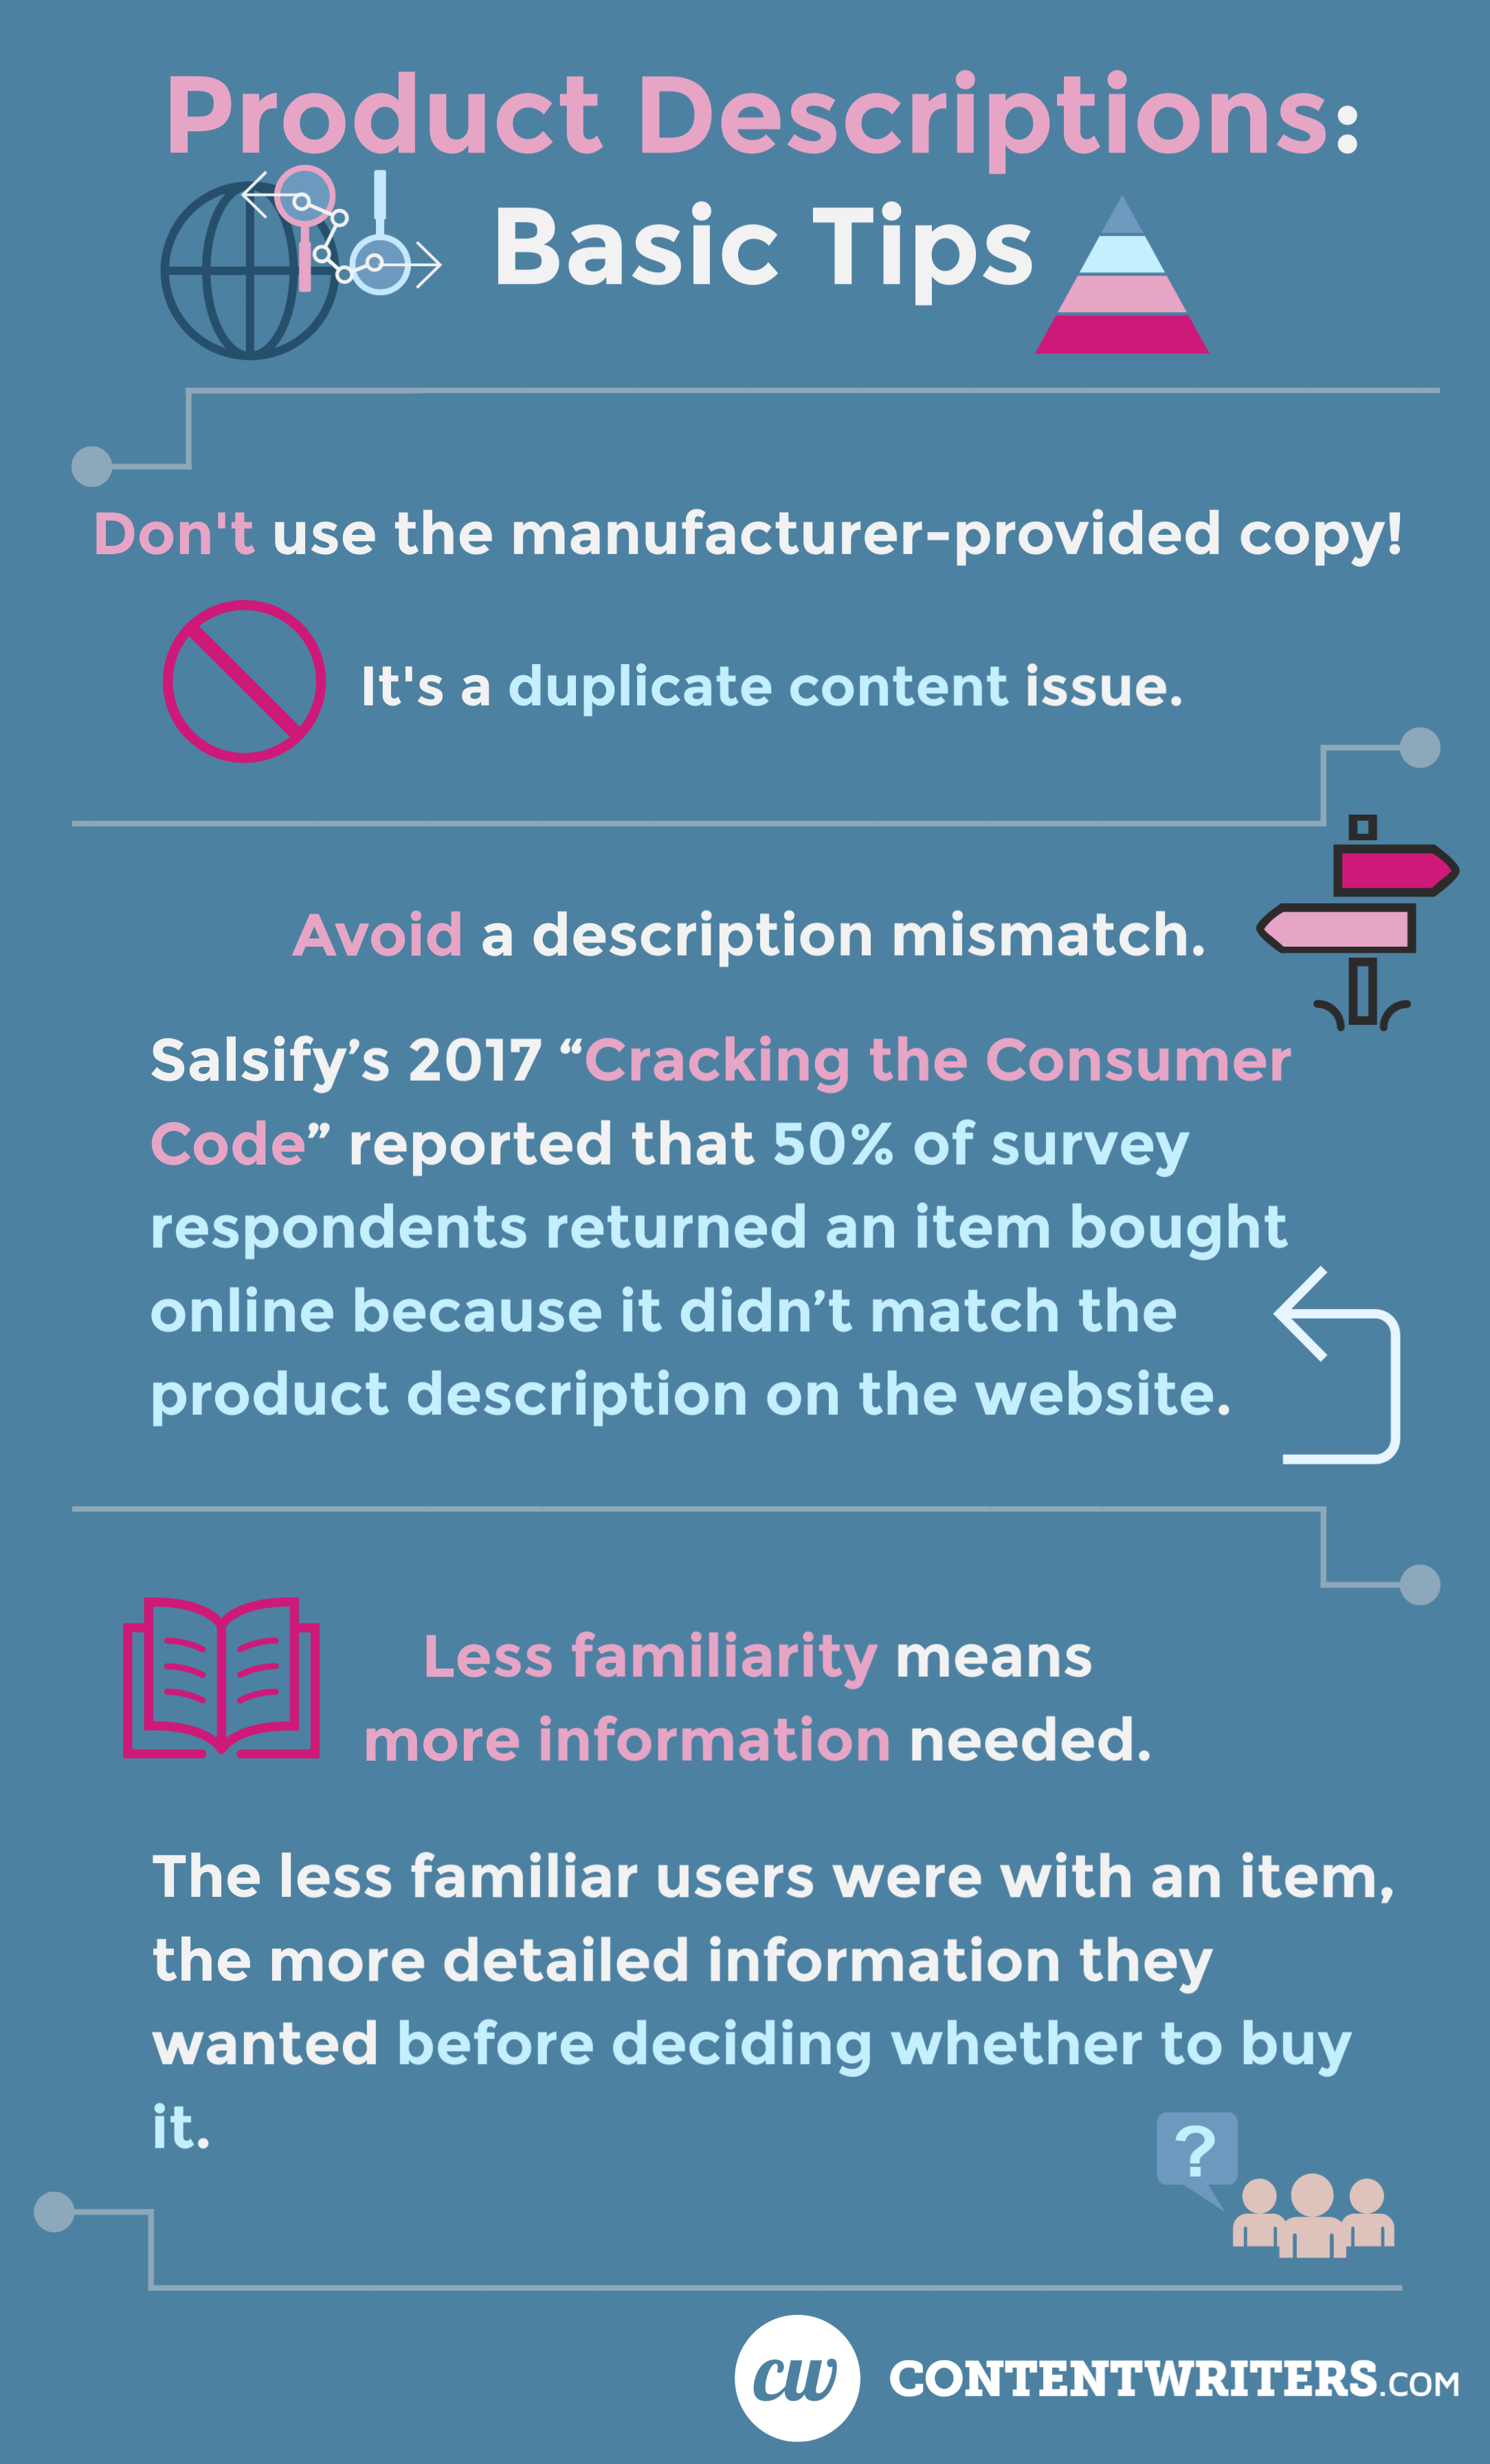 Product Descriptions Basic Tips ContentWriters

Don't use the manufacturer-provided copy! It's a duplicate content issue.

Avoid a description mismatch. Salsify's 2017 "Cracking the Consumer Code" reported that 50% of survey respondents returned an item bought online because it didn't match the product description on the website.

Less familiarity means more information needed.

The less familiar users were with an item the more detailed information they wanted before deciding whether to buy it.